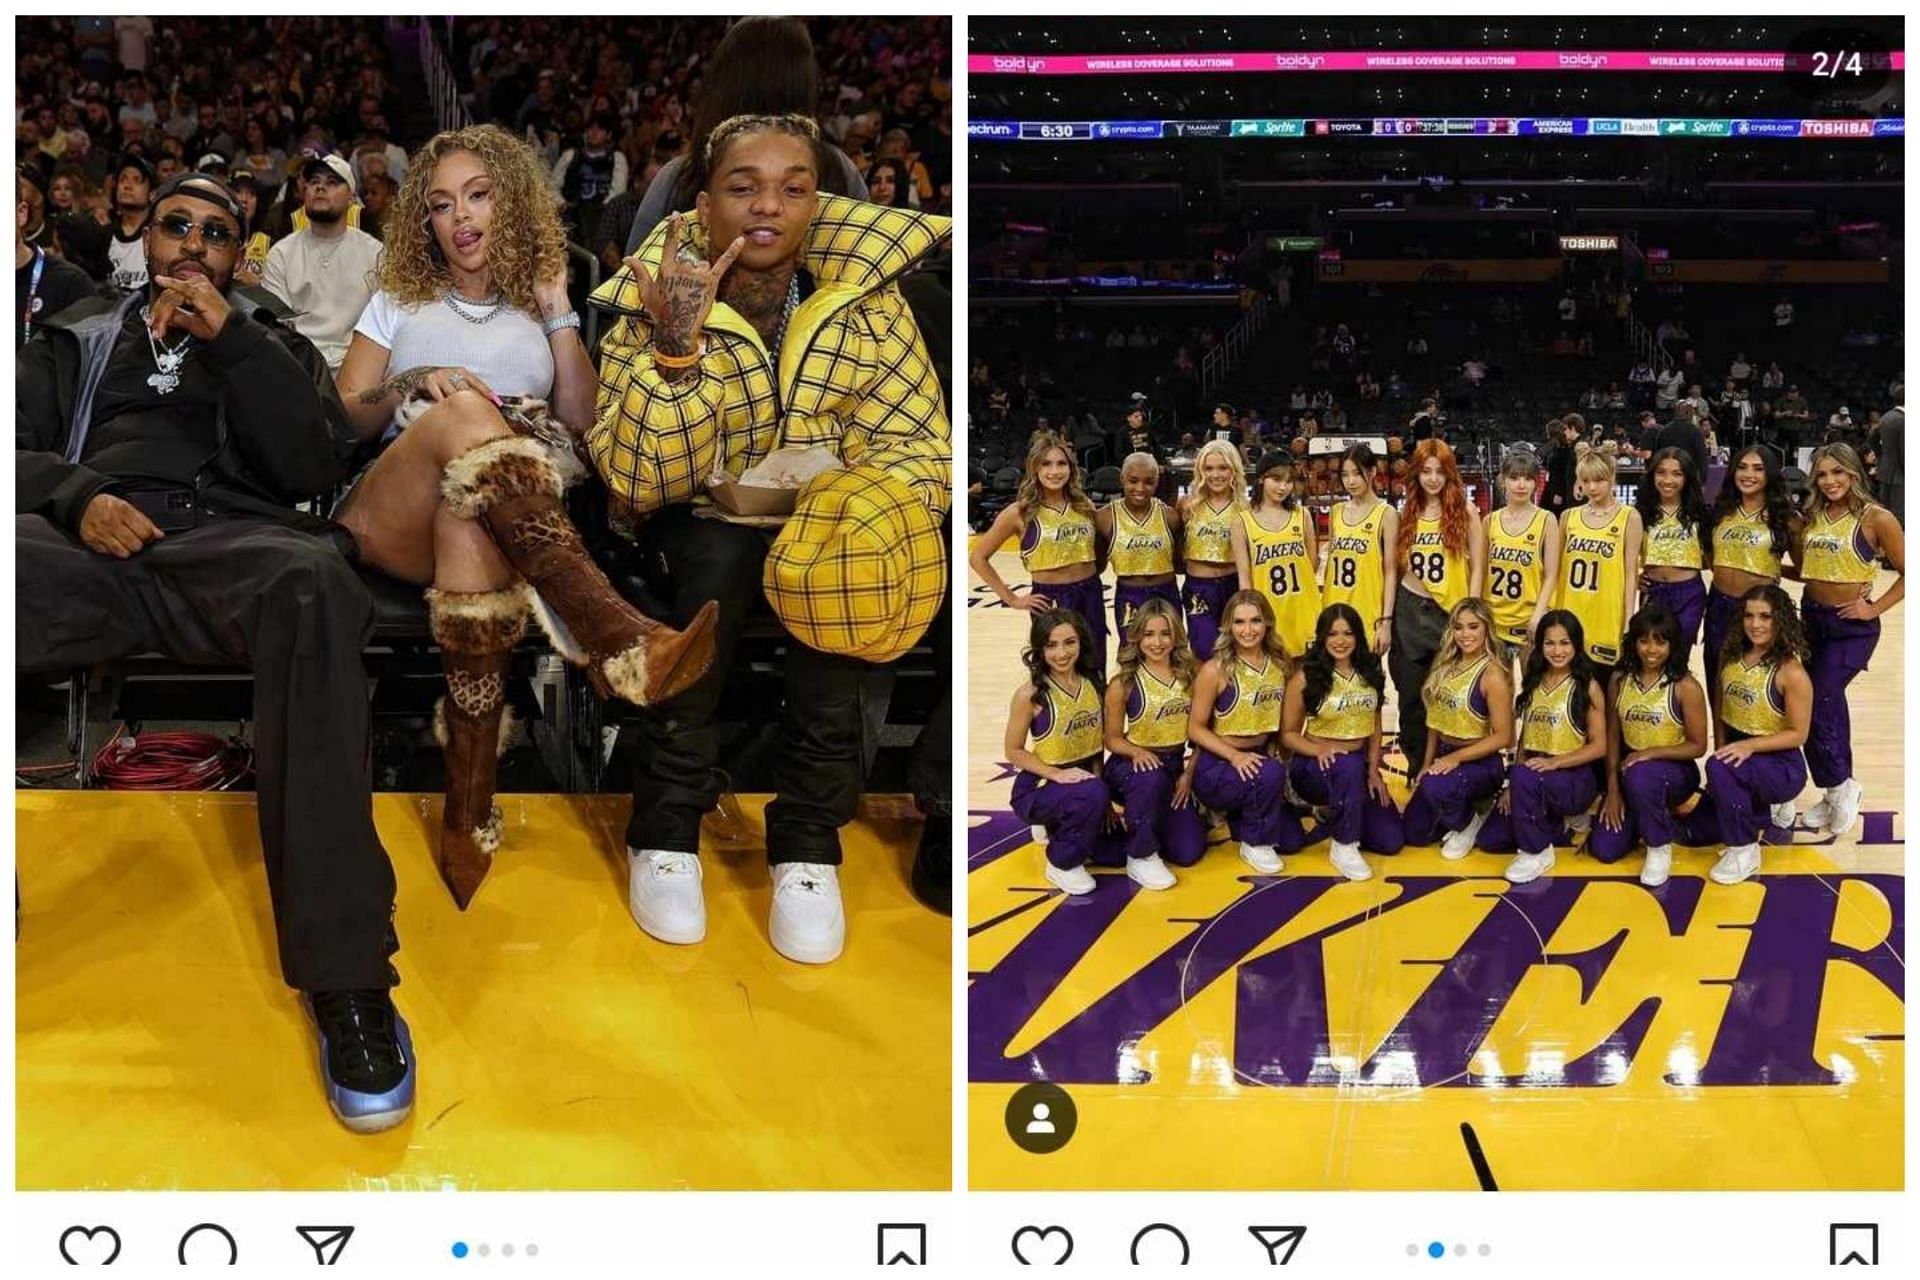 Swae Lee (left), K-Pop Group (right), and more were in attendance as Lakers eclipse Clippers in Wednesday